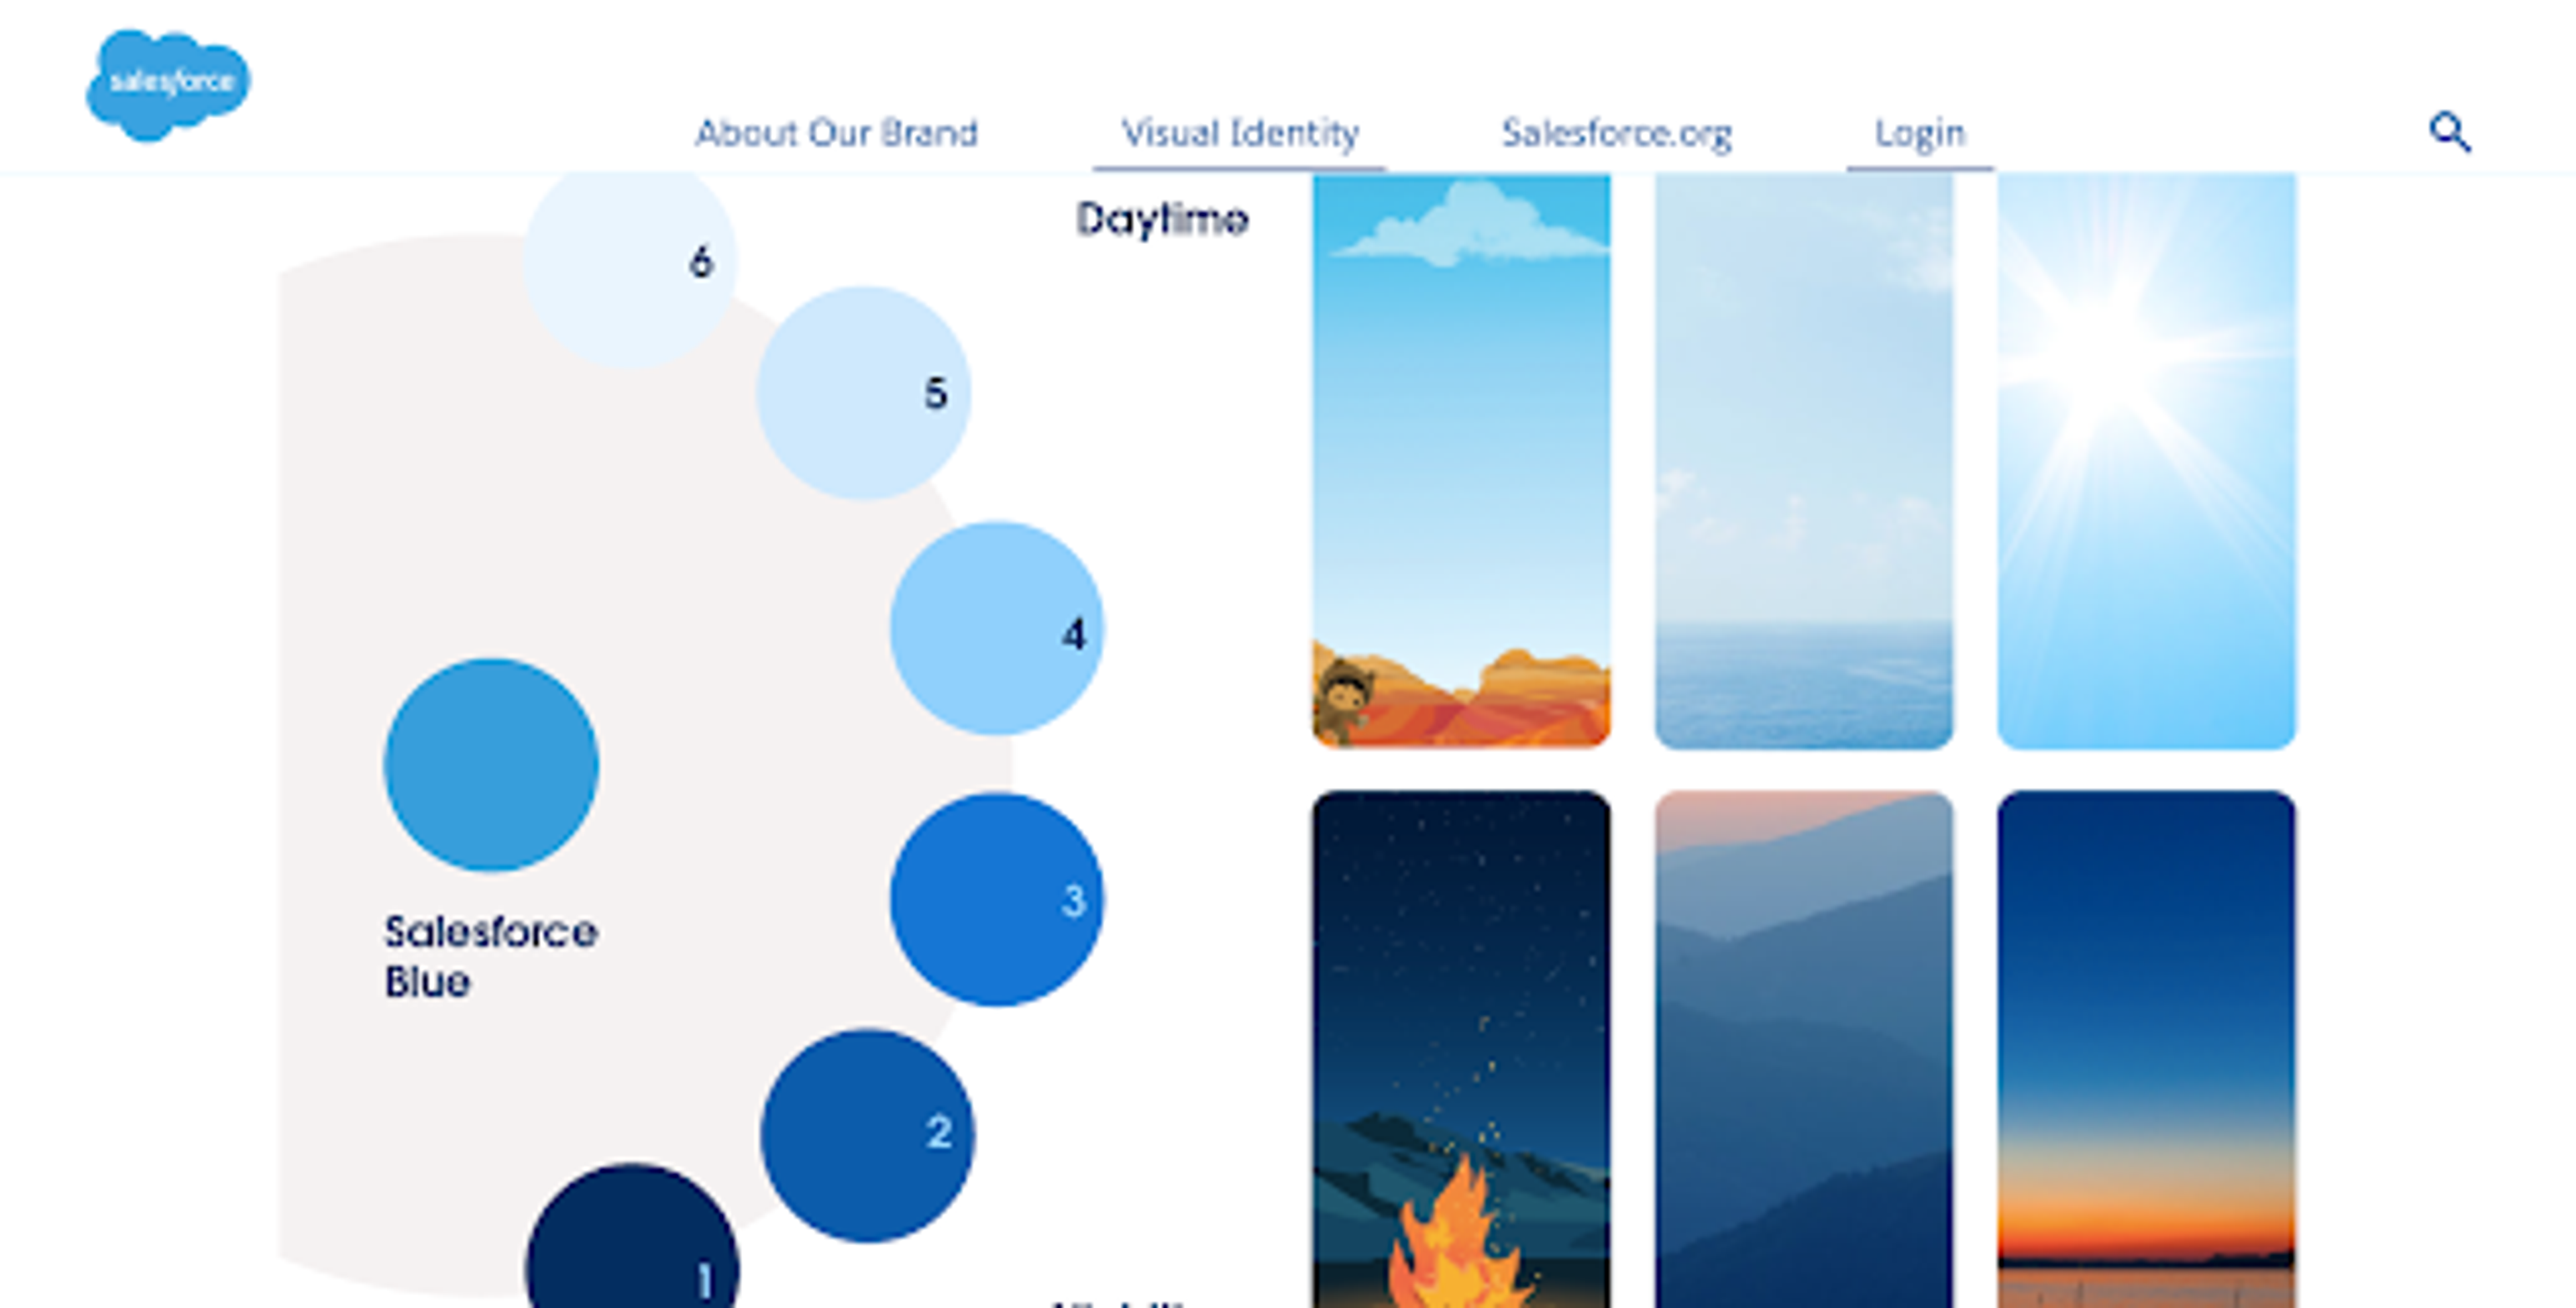 A page from the Salesforce brand guidelines. 